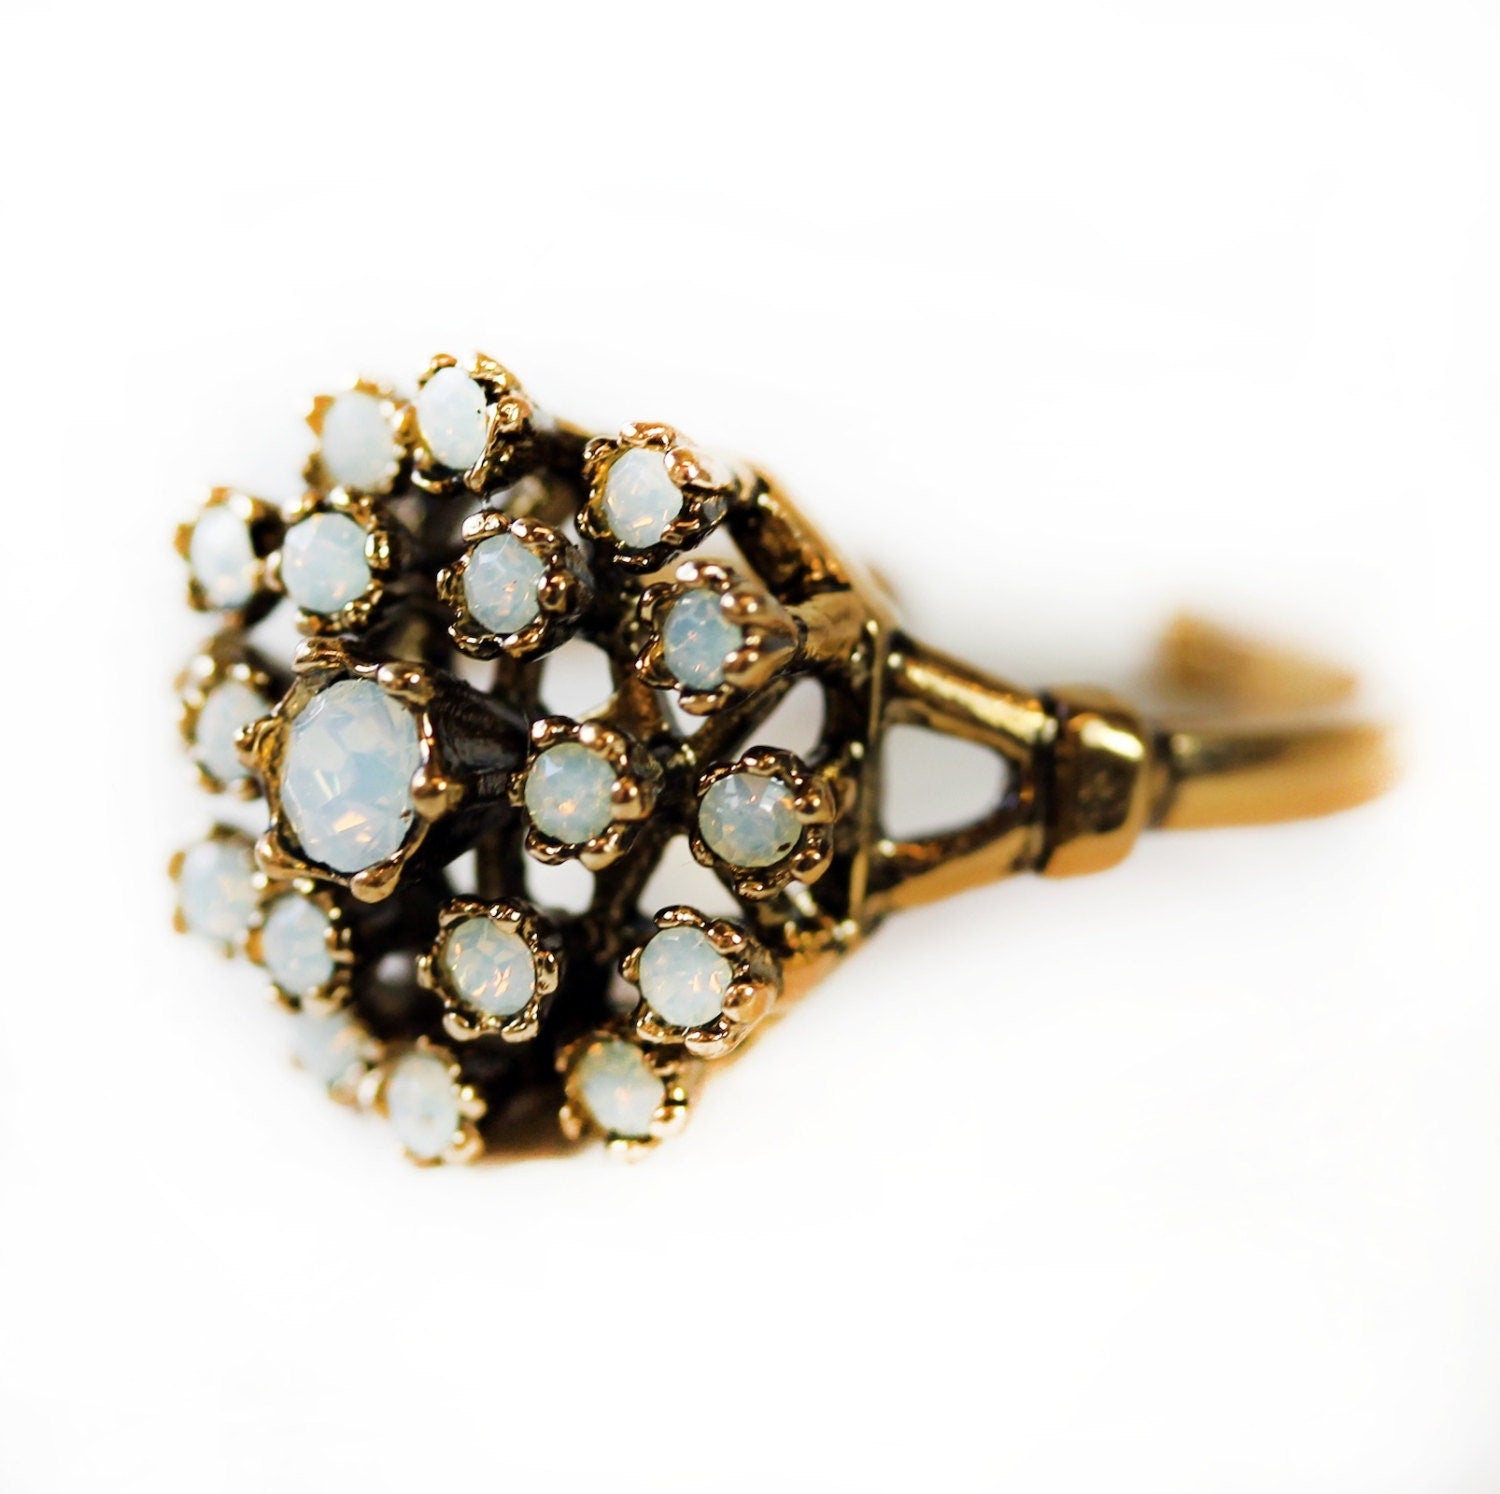 Vintage Ring Pinfire Opal Cluster Antique 18k Gold Cocktail Ring Womans Jewlery Opal Handmade Rings R108 - Limited Stock - Never Worn